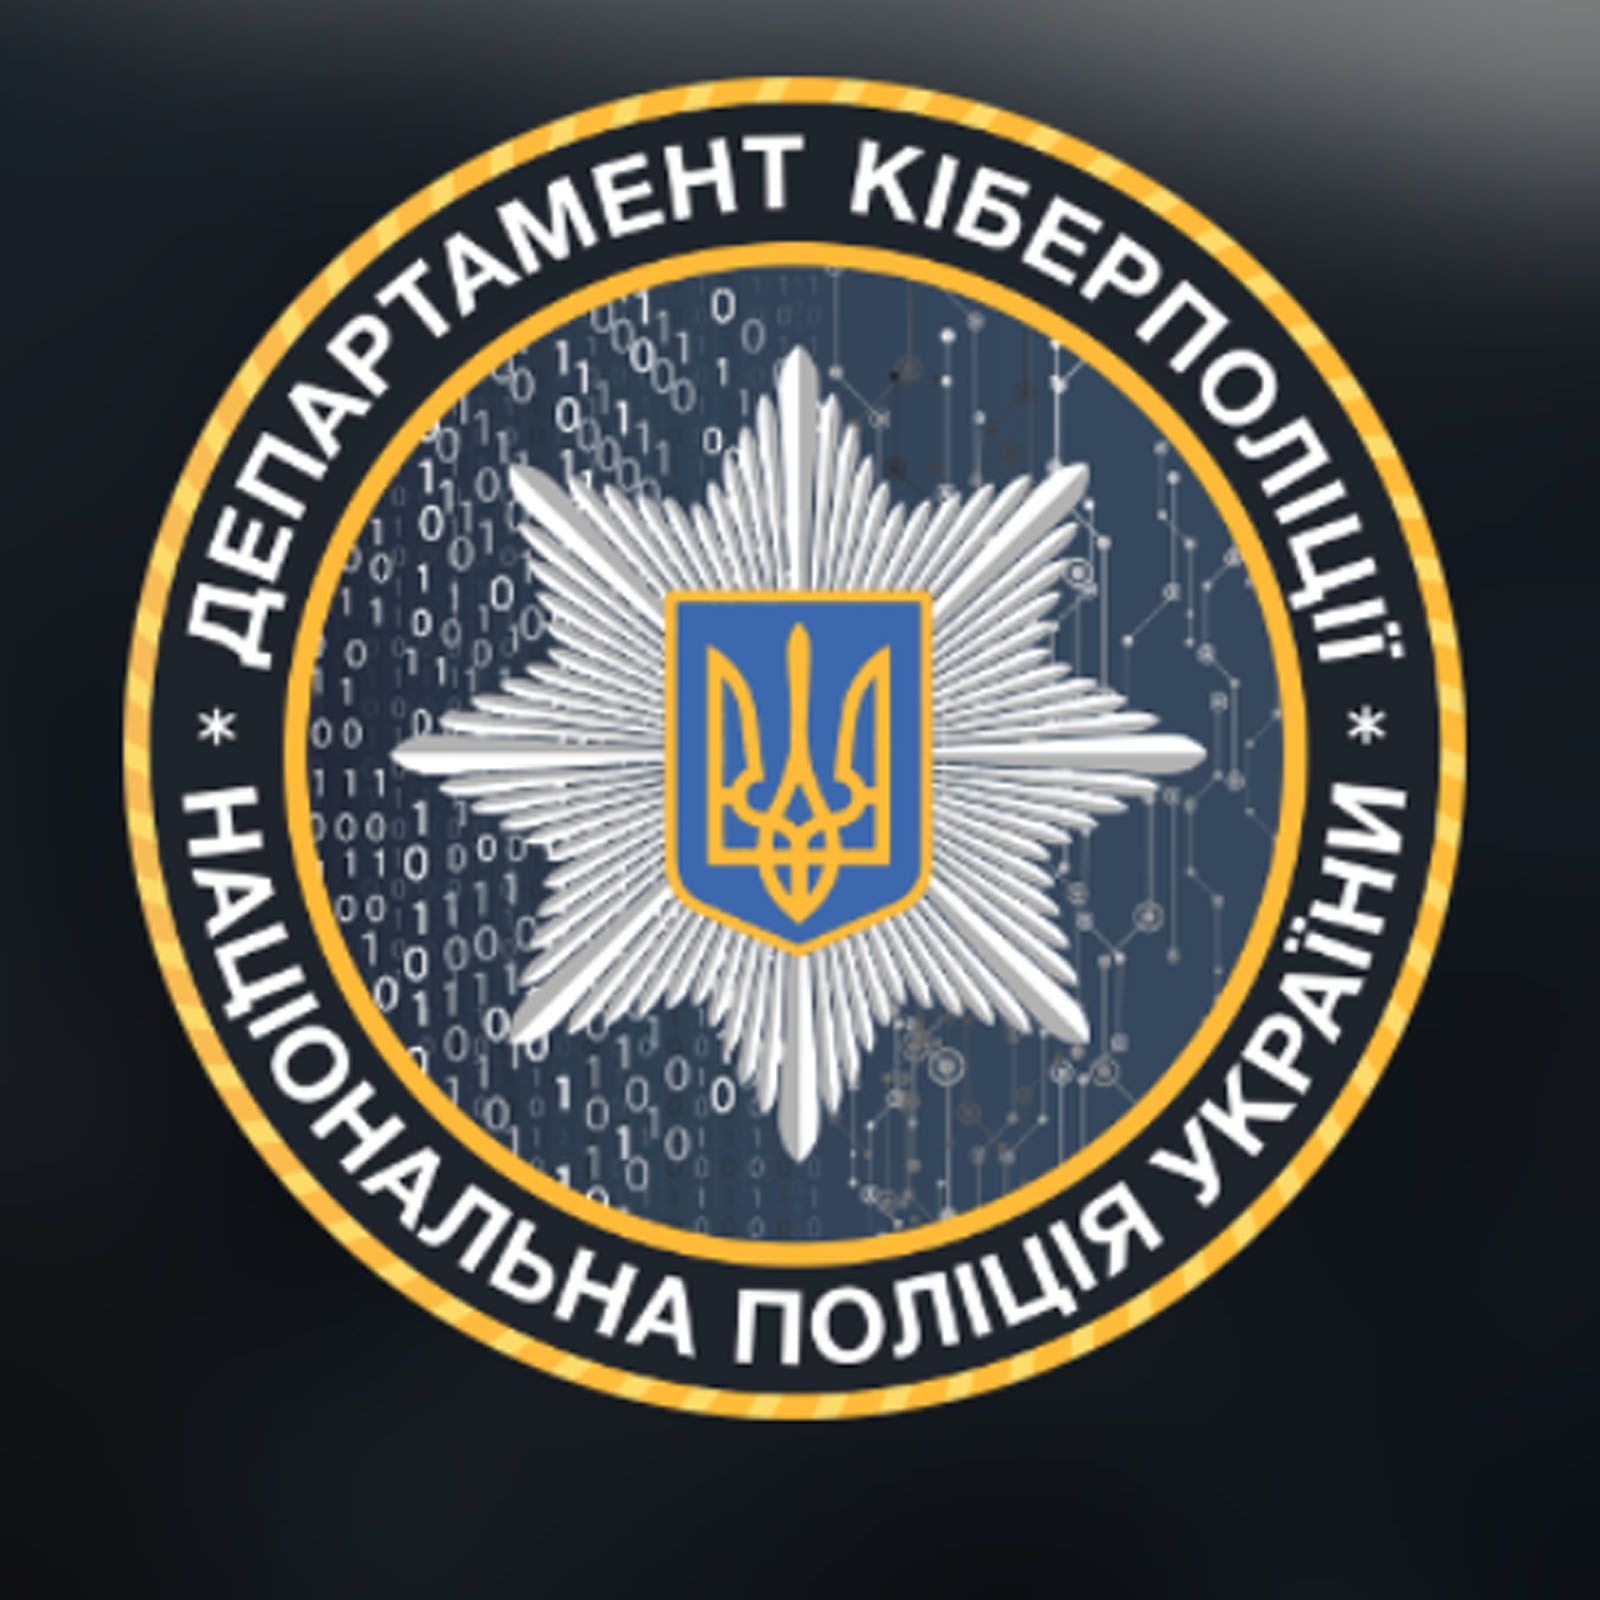 Ukraine’s Cyberpolice Supports Legalization of Cryptocurrencies